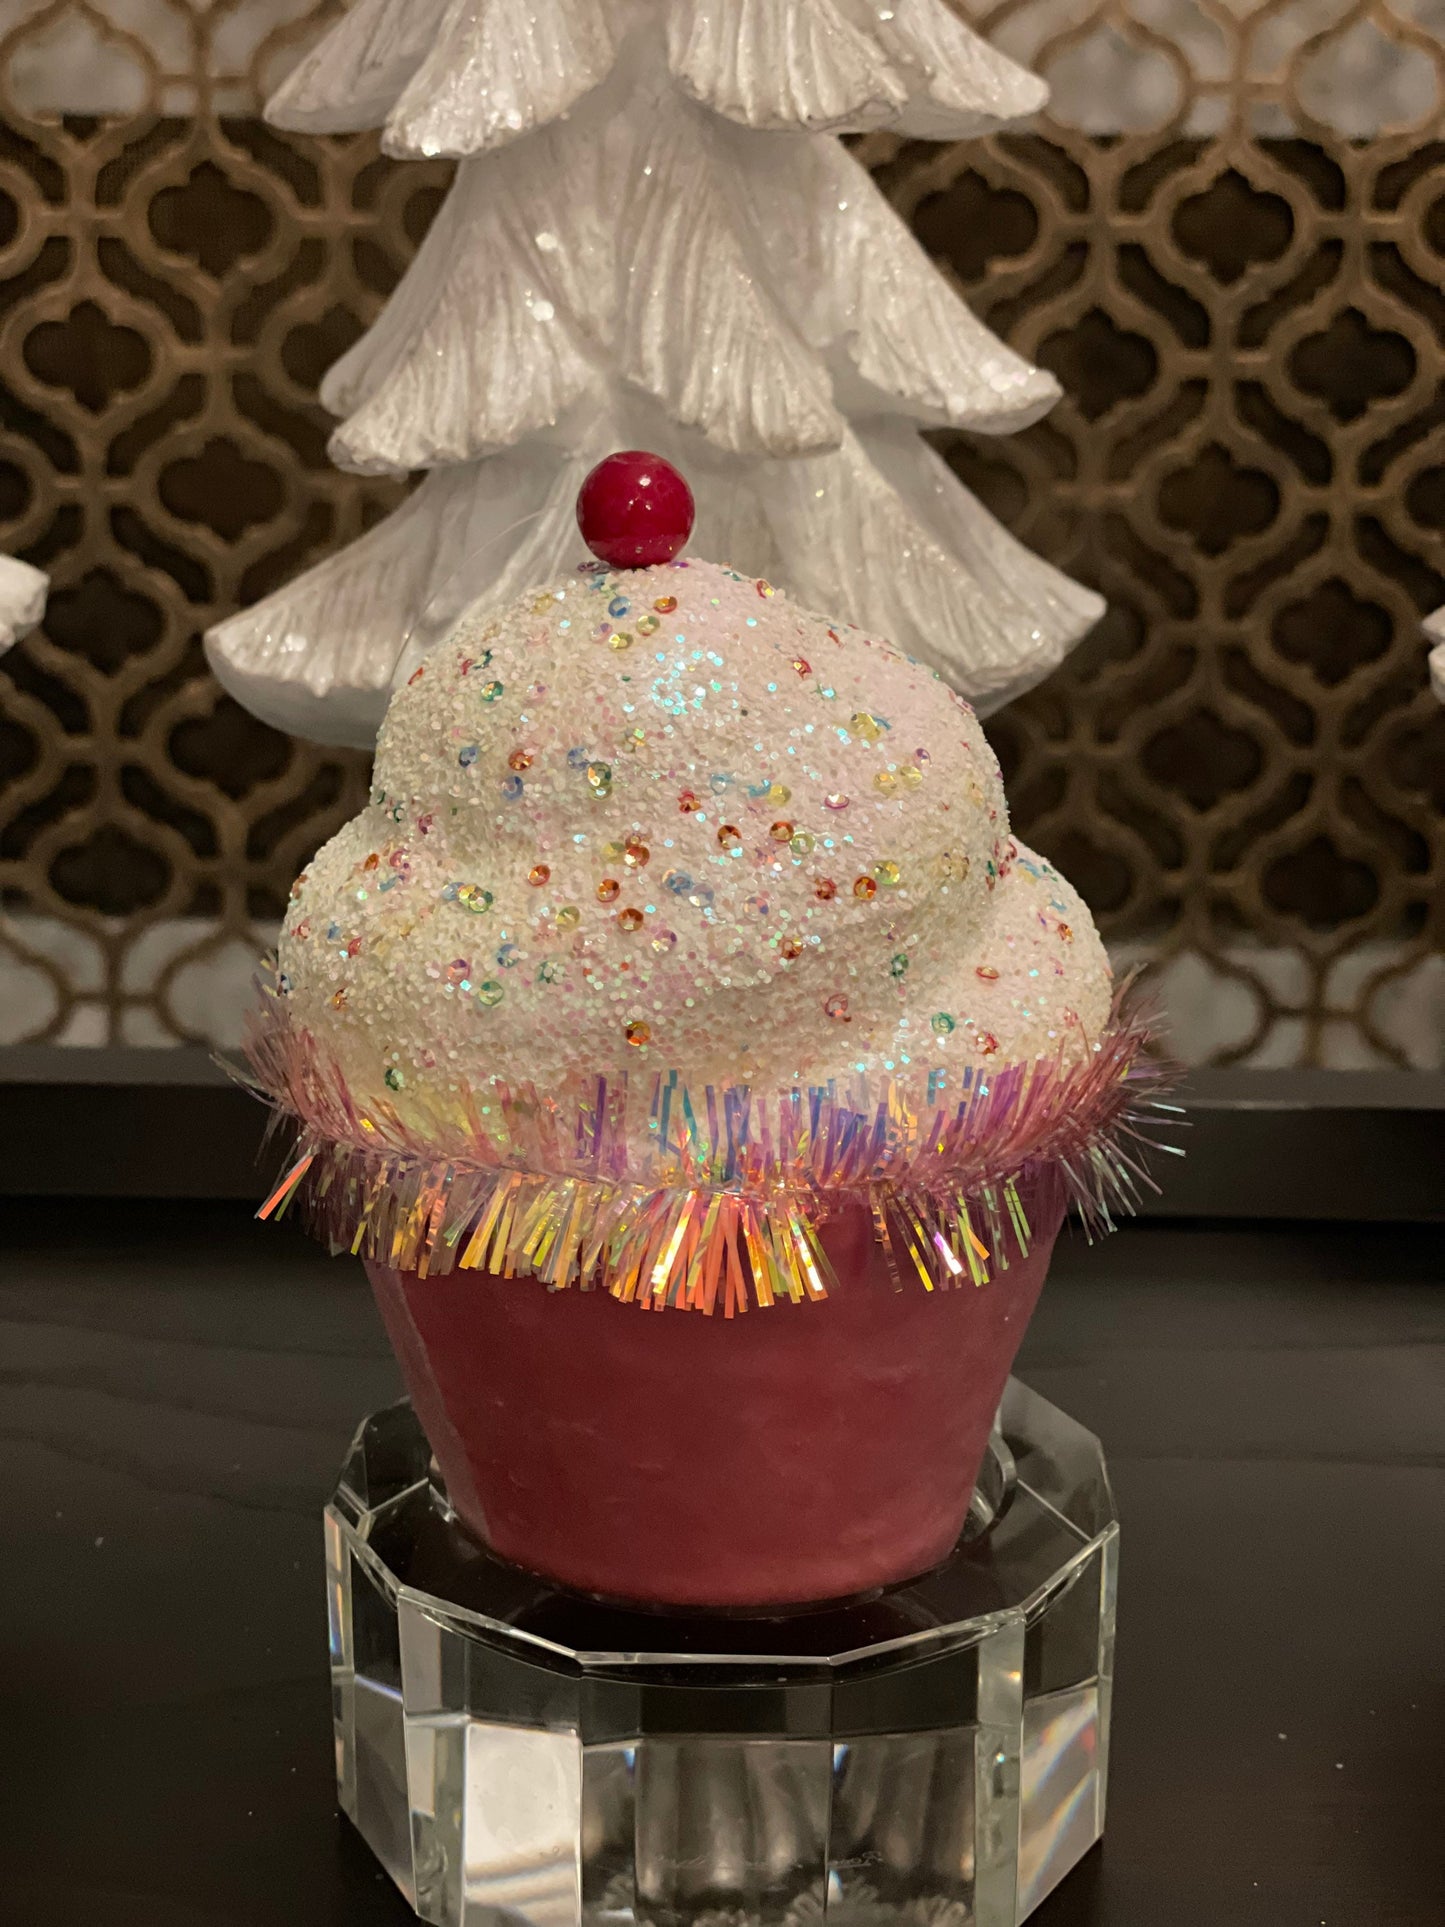 7” Pink Cupcake with sprinkles ornament. One pink cupcake.